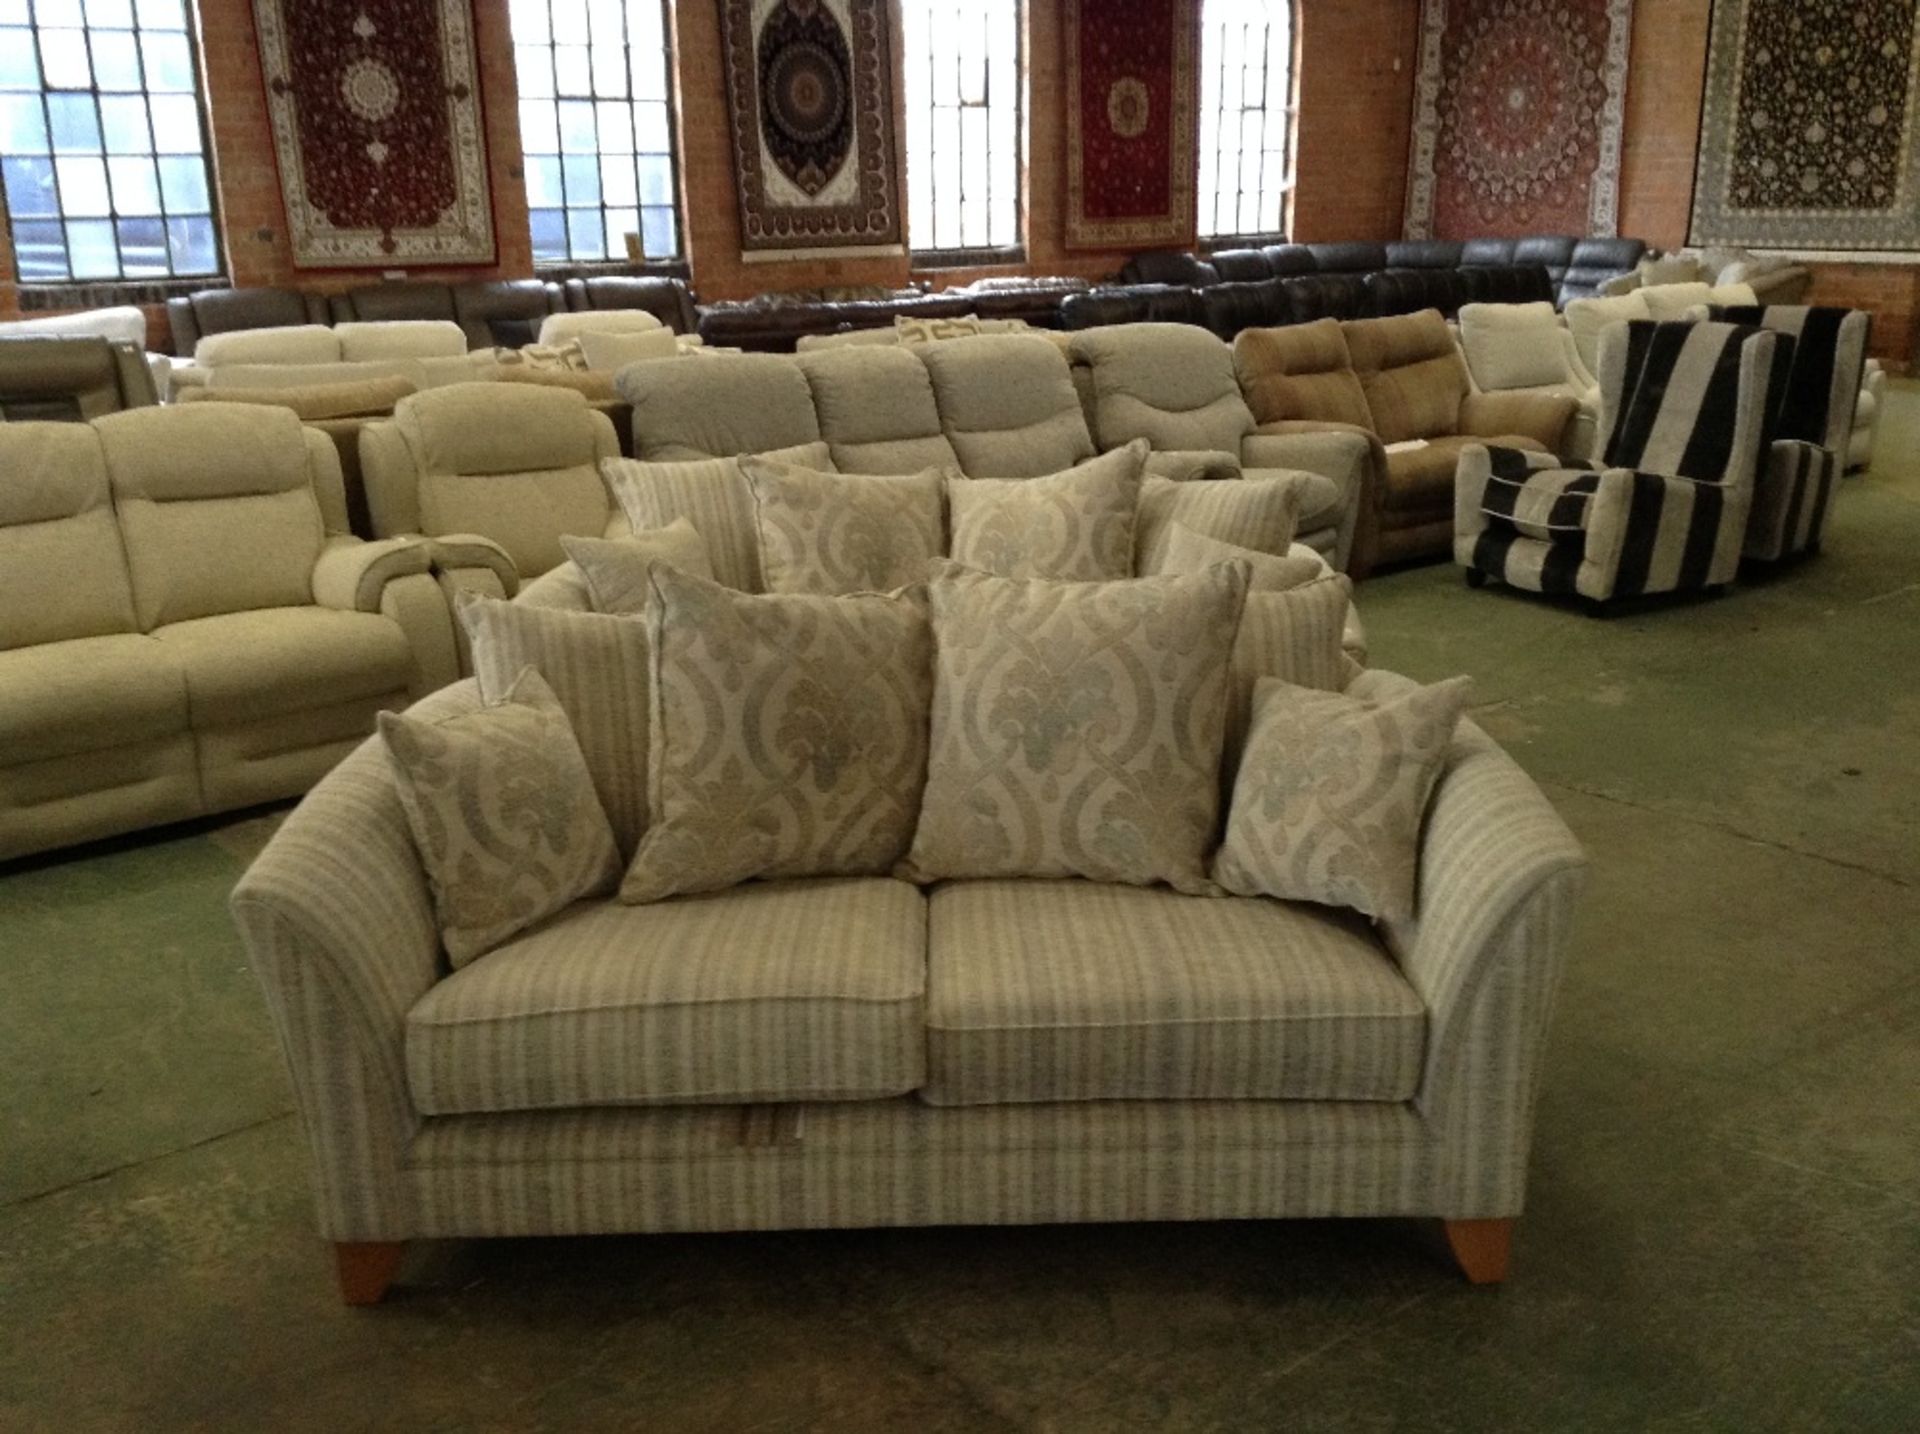 NATURAL FLORAL PATTERNED 2 SEATER SOFA AND STRIPED 3 SEATER SOFA (slightly damaged) (TR000886 WO0232